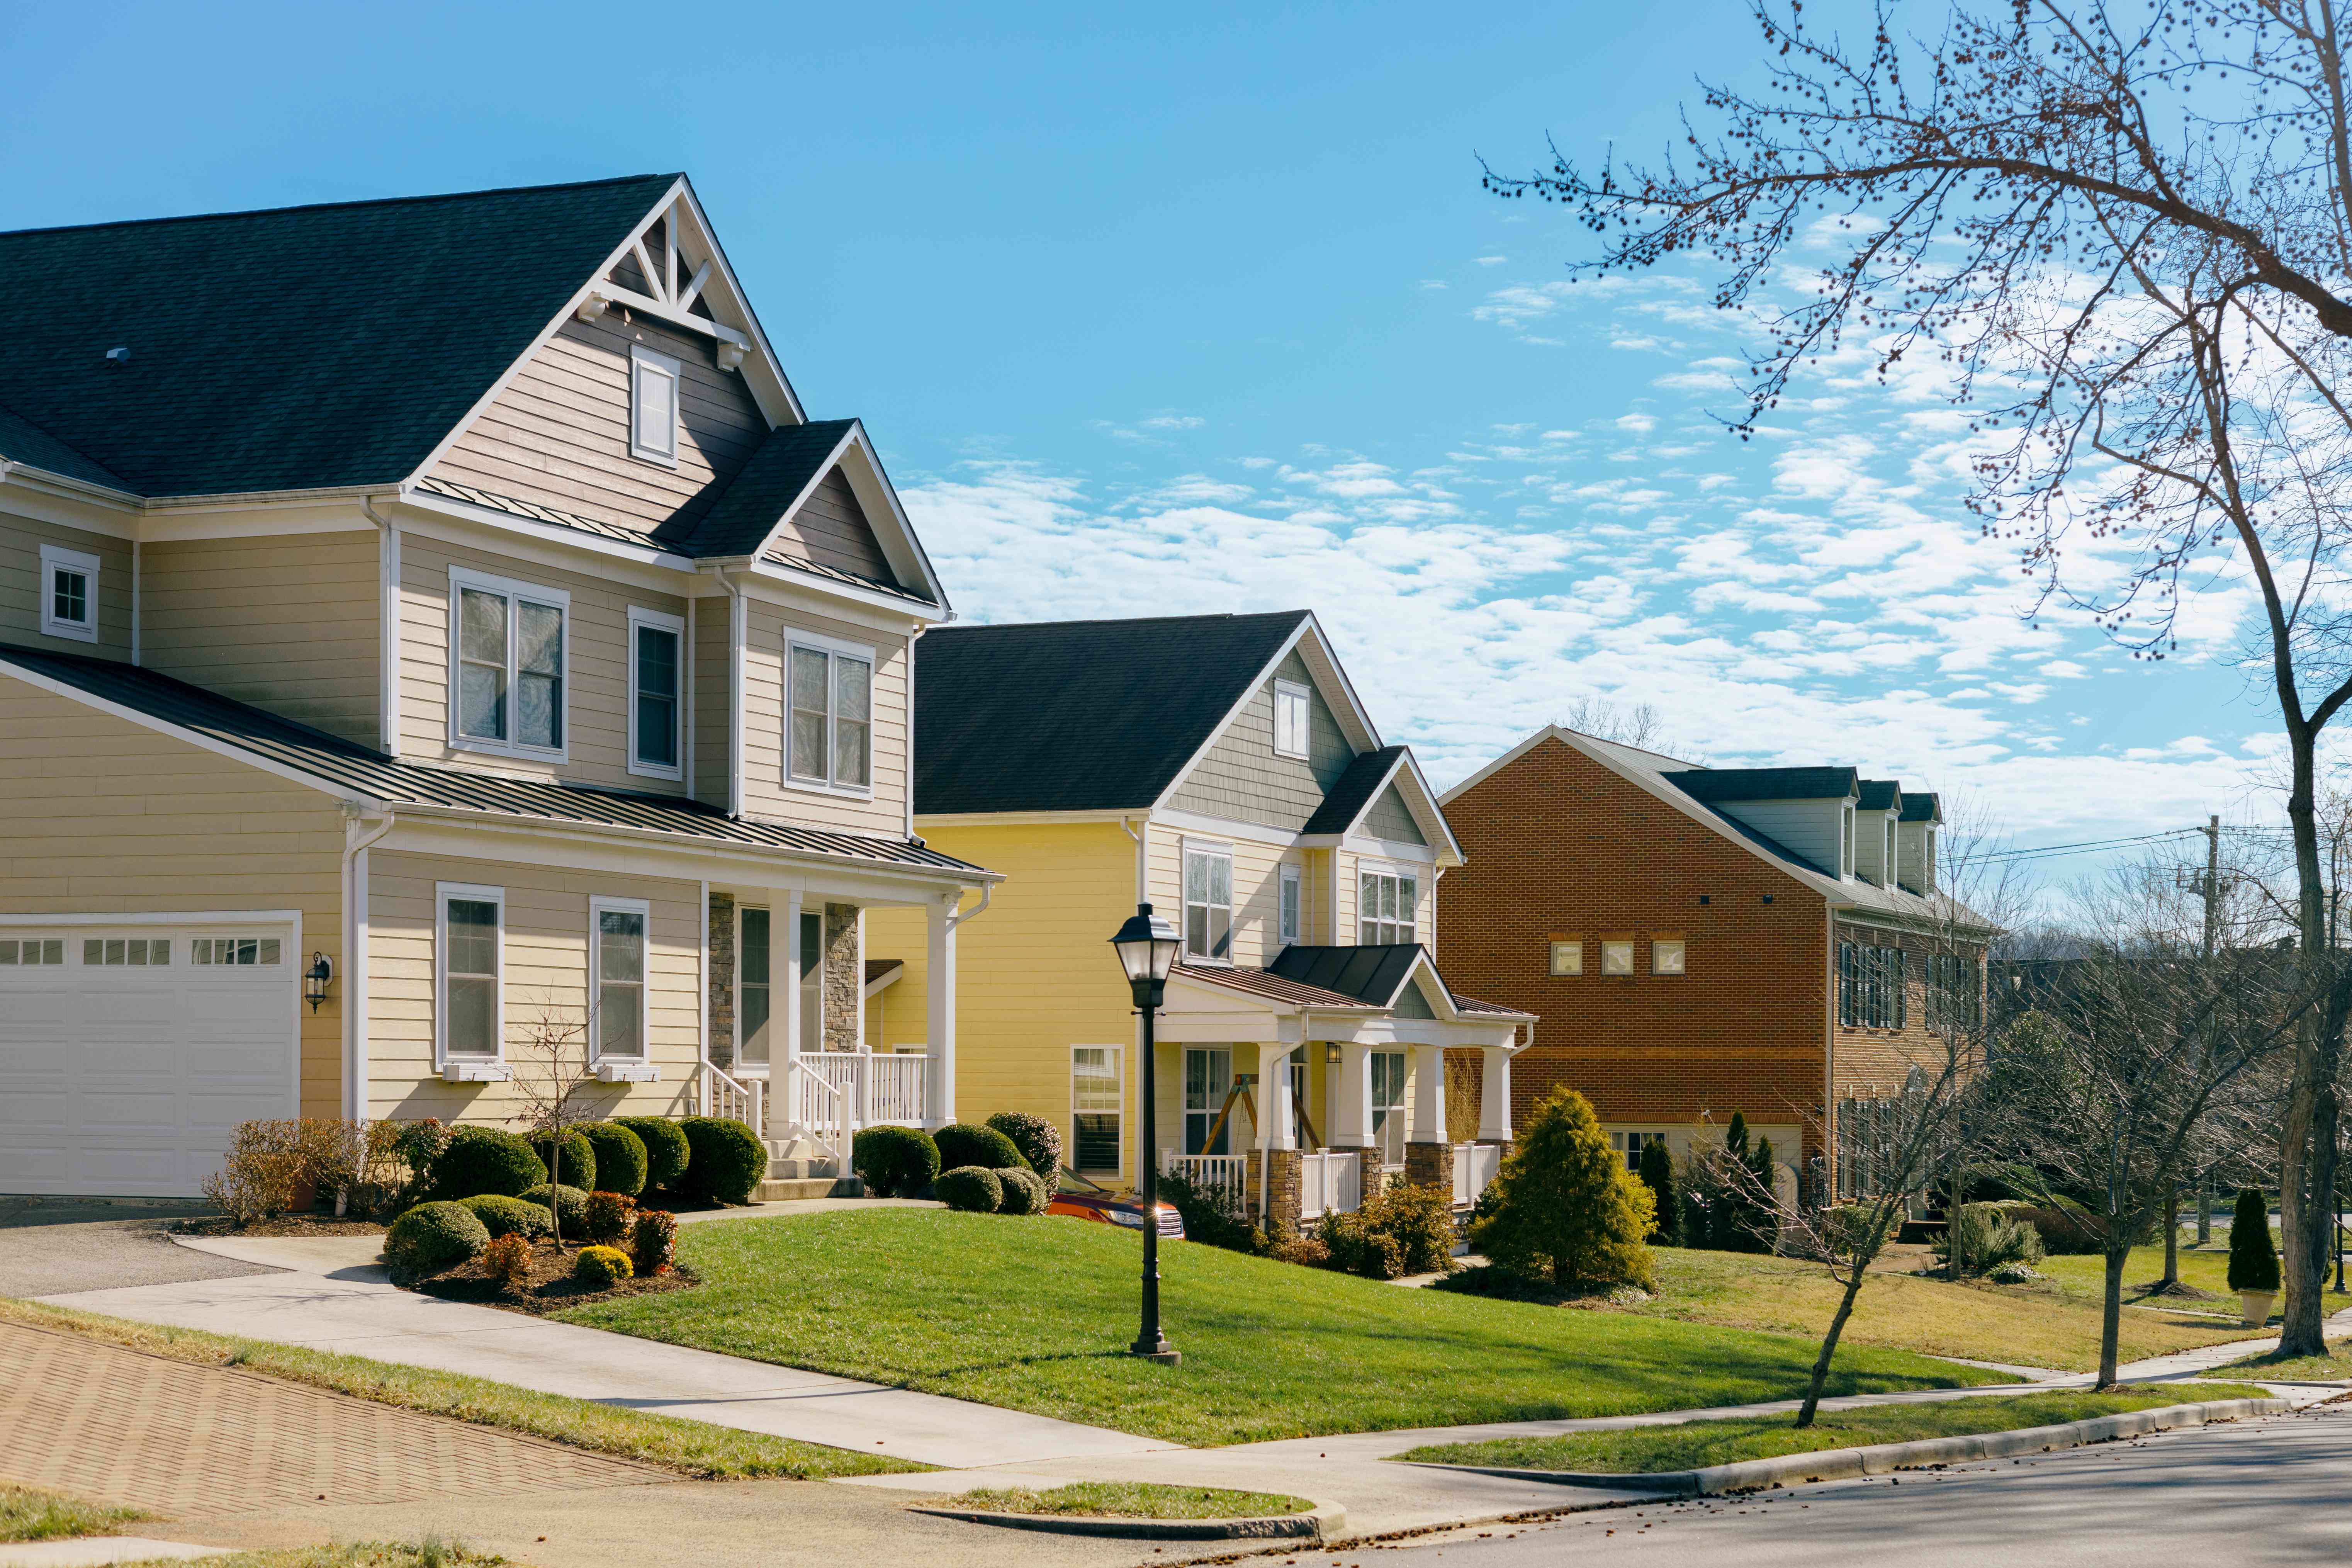 Street view of detached homes 